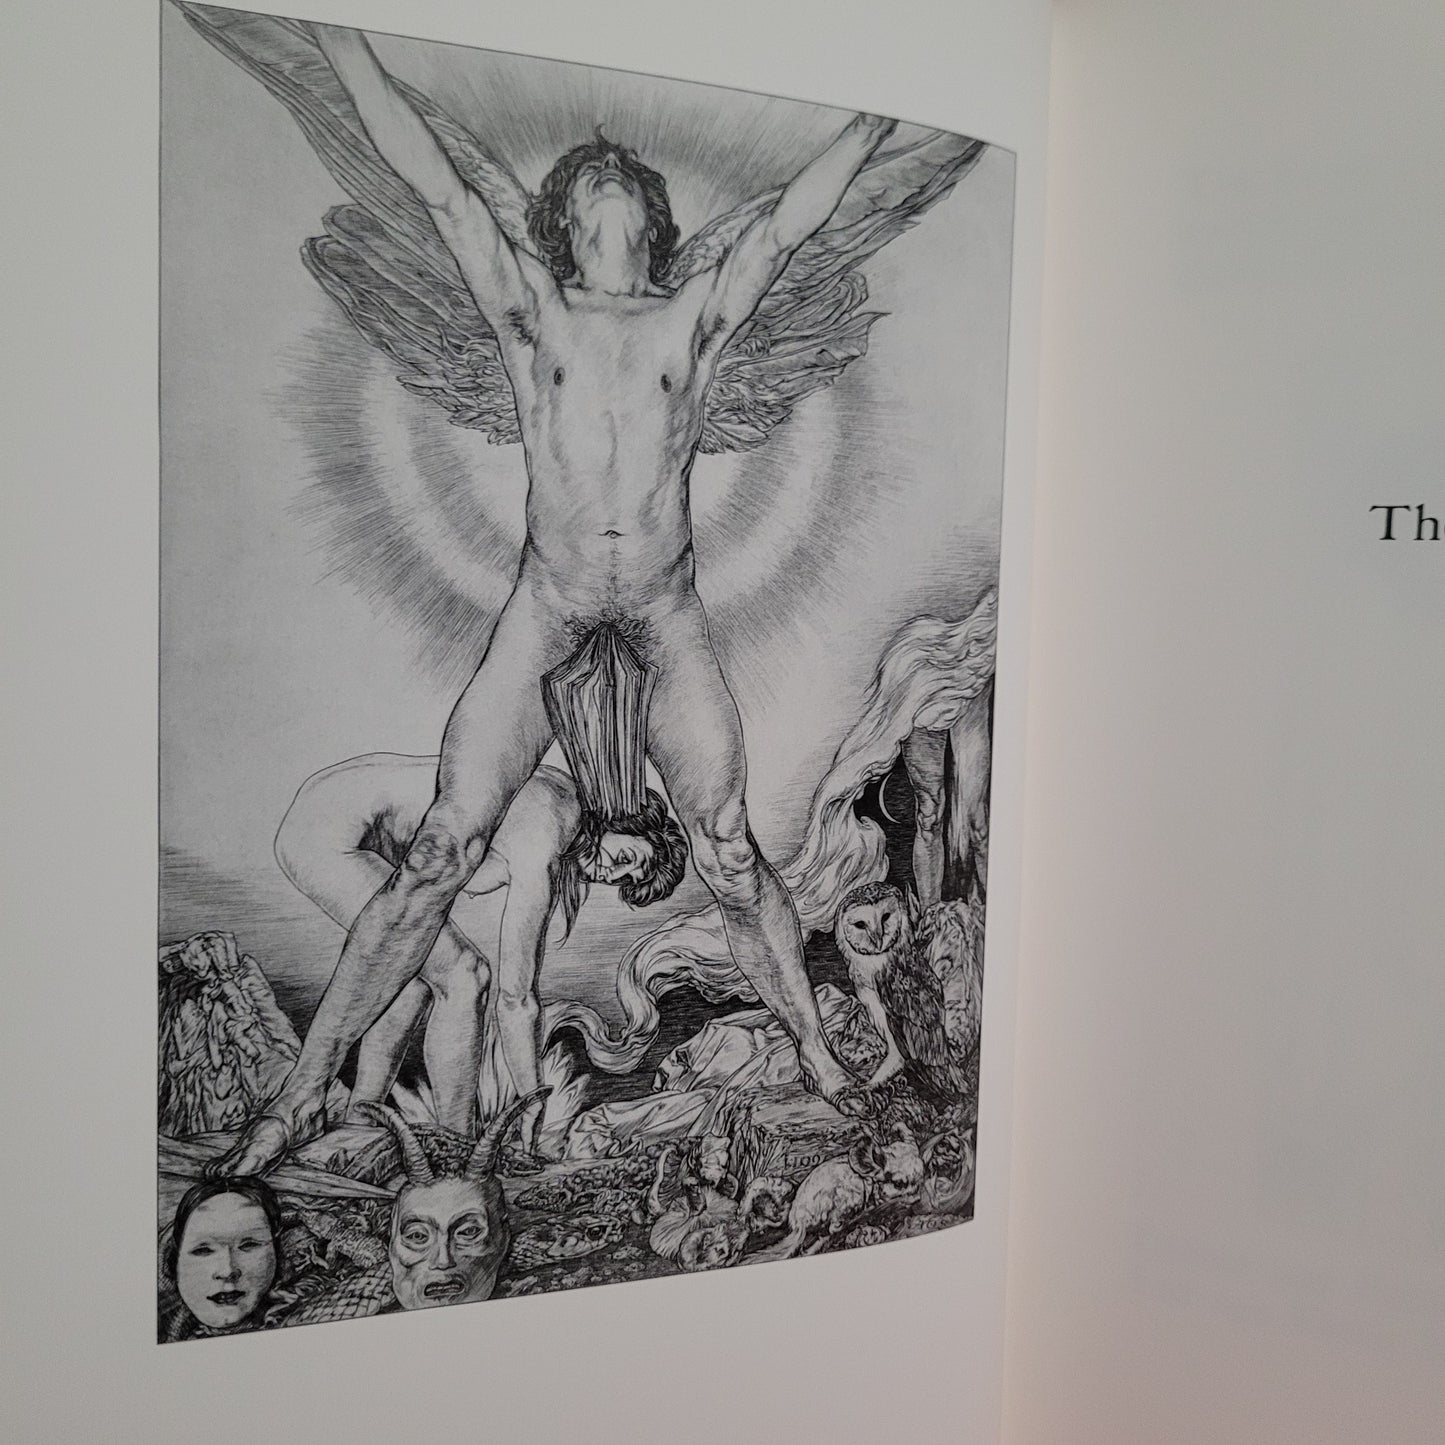 The Focus of Life (Redux) by Austin Osman Spare with Essays from Robert Shehu-Ansell and Phil Baker (Fulgur Press, 2012) Hardback